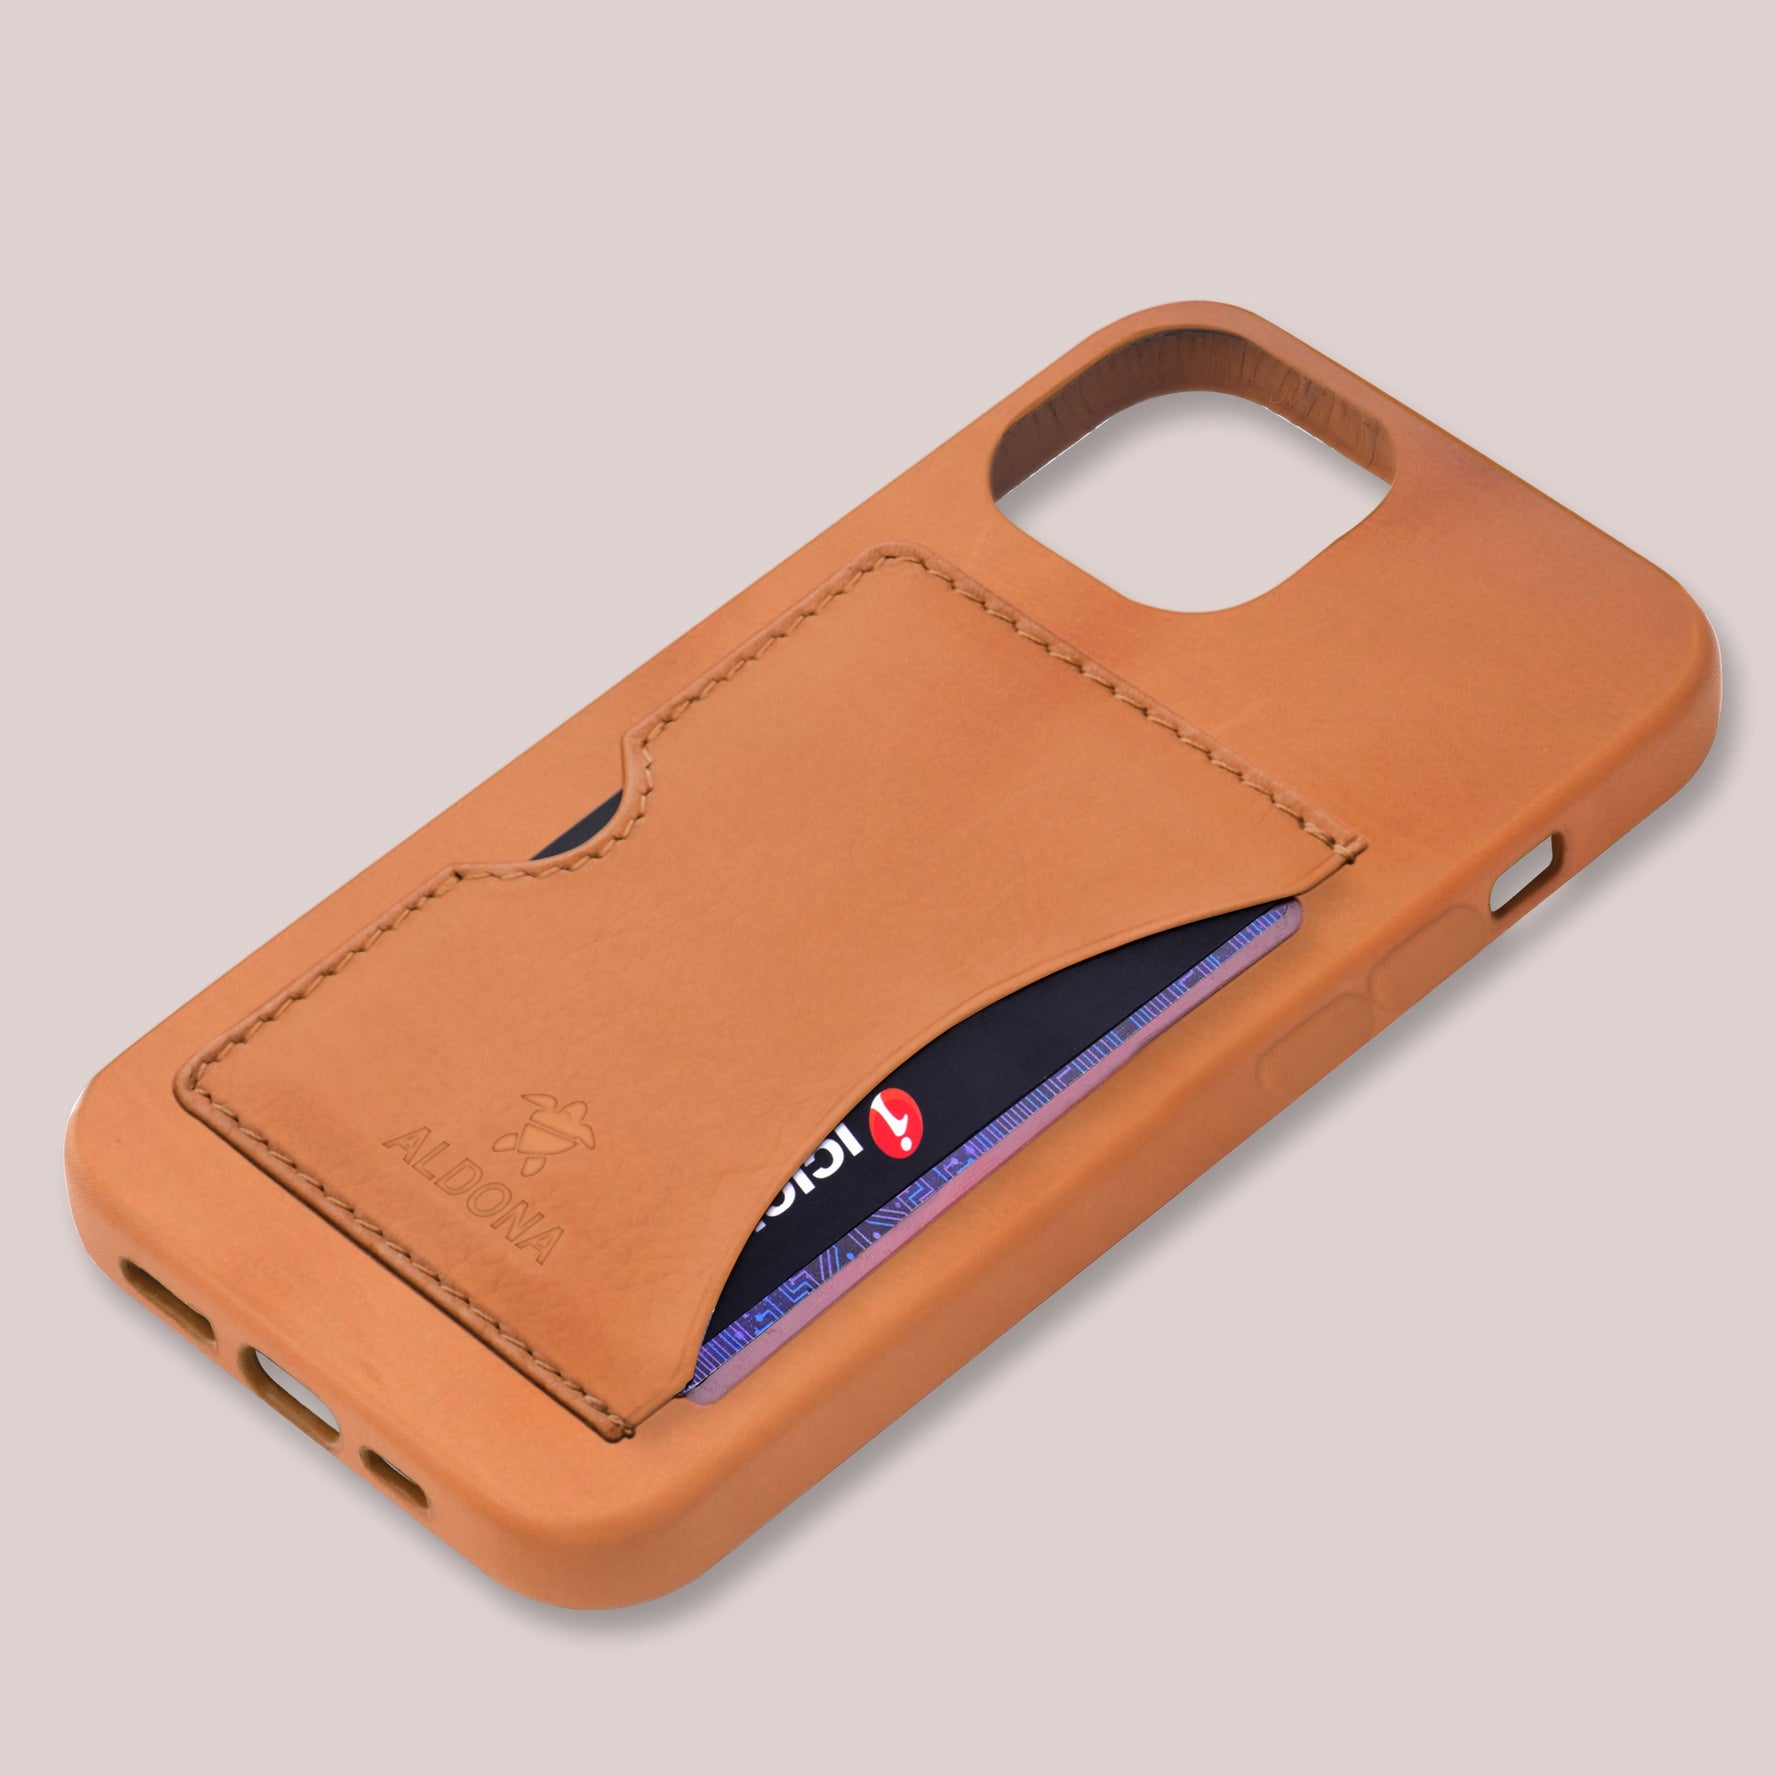 Baxter Card Case for iPhone 12 Pro Max - Vintage Tan